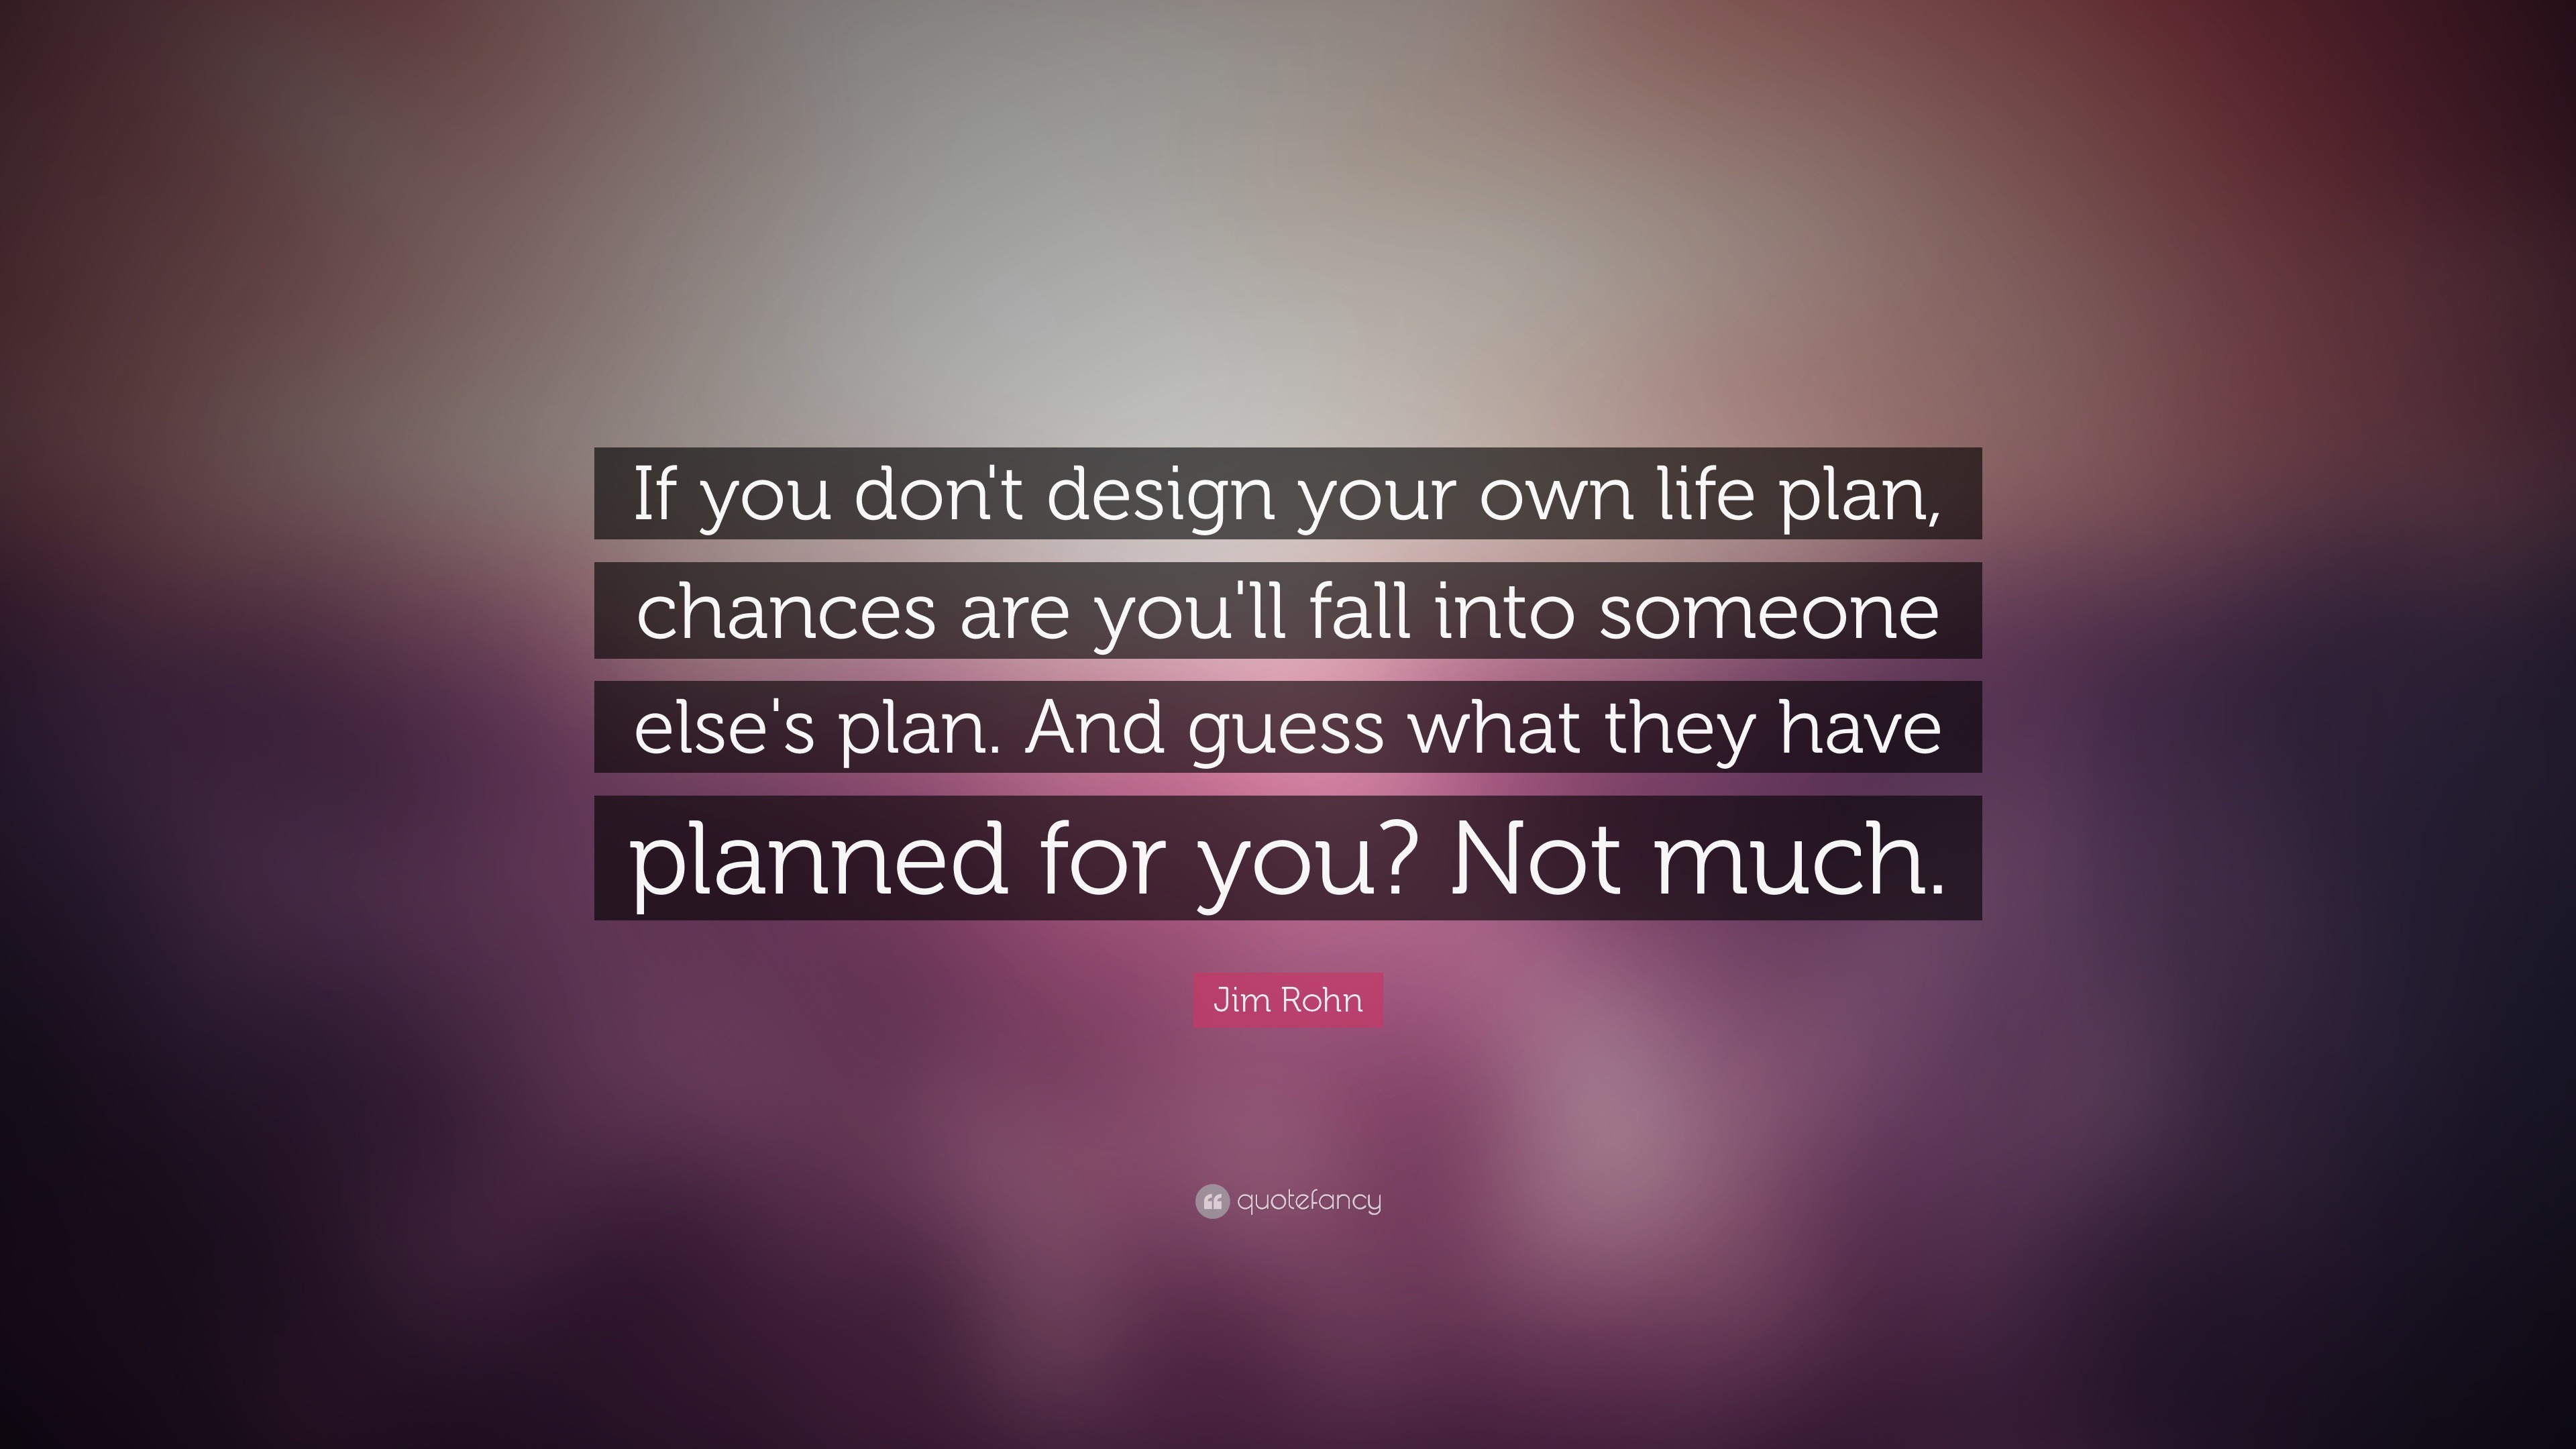 Jim Rohn Quote “If you don't design your own life plan